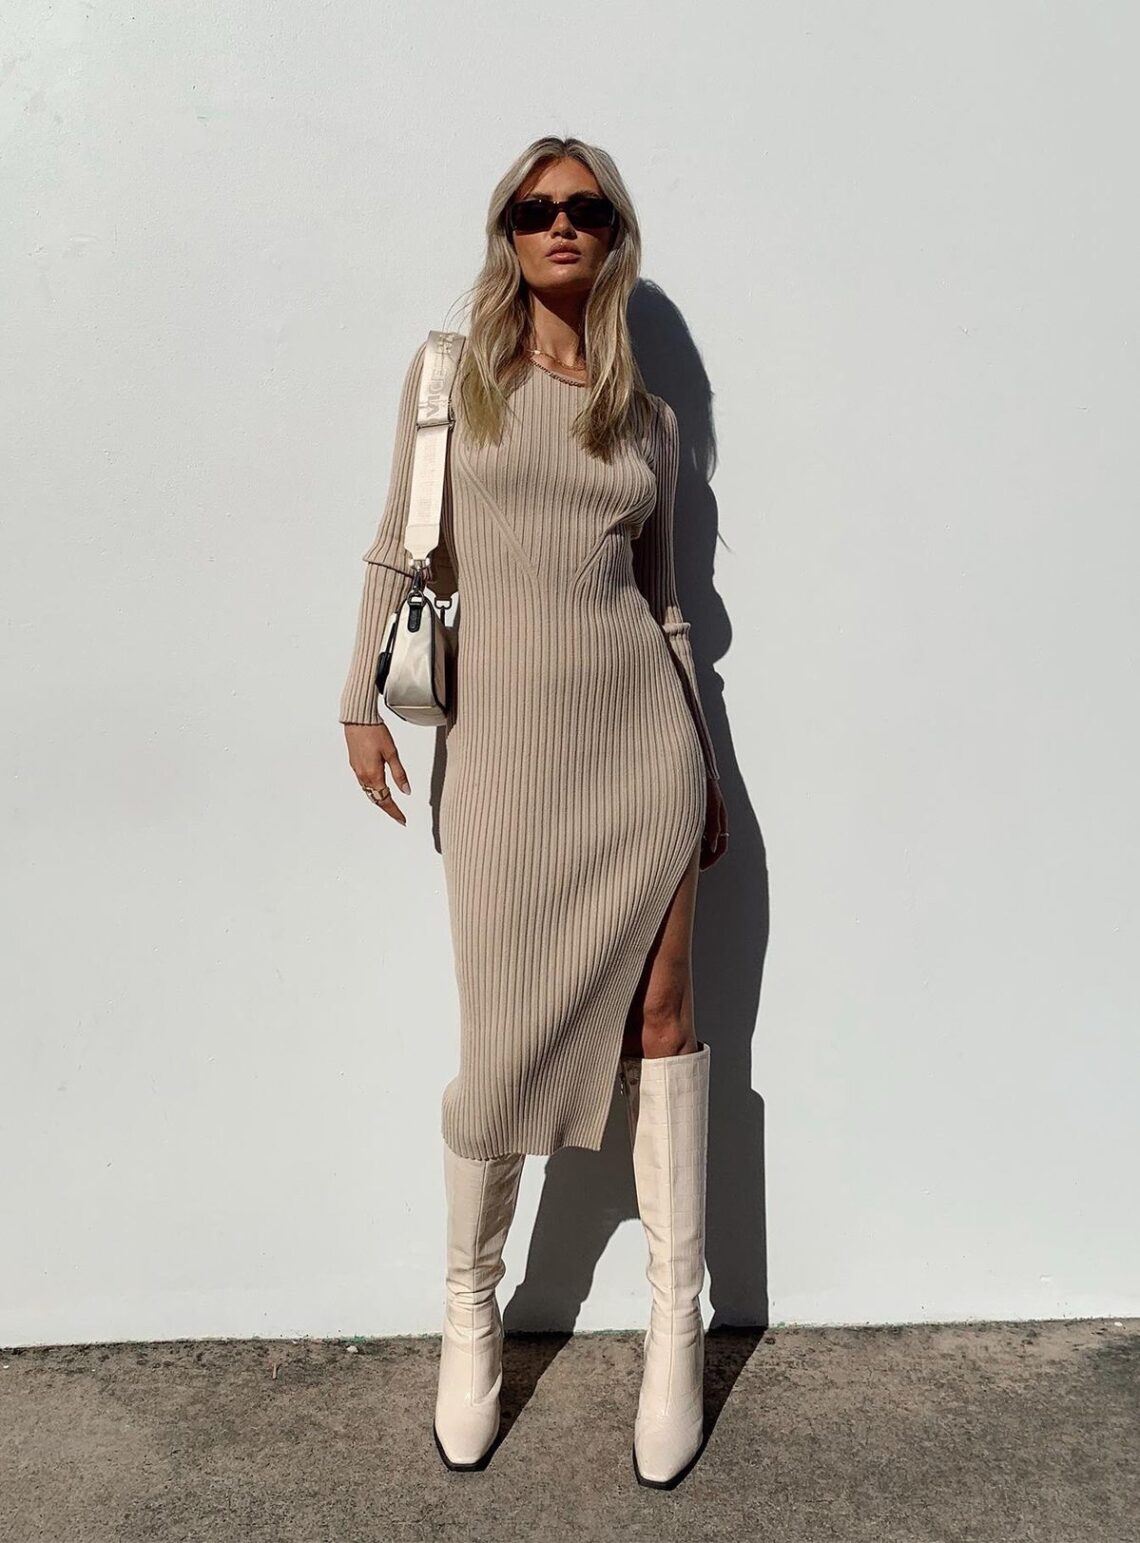 alt="How to Style Knit Dresses this Fall"